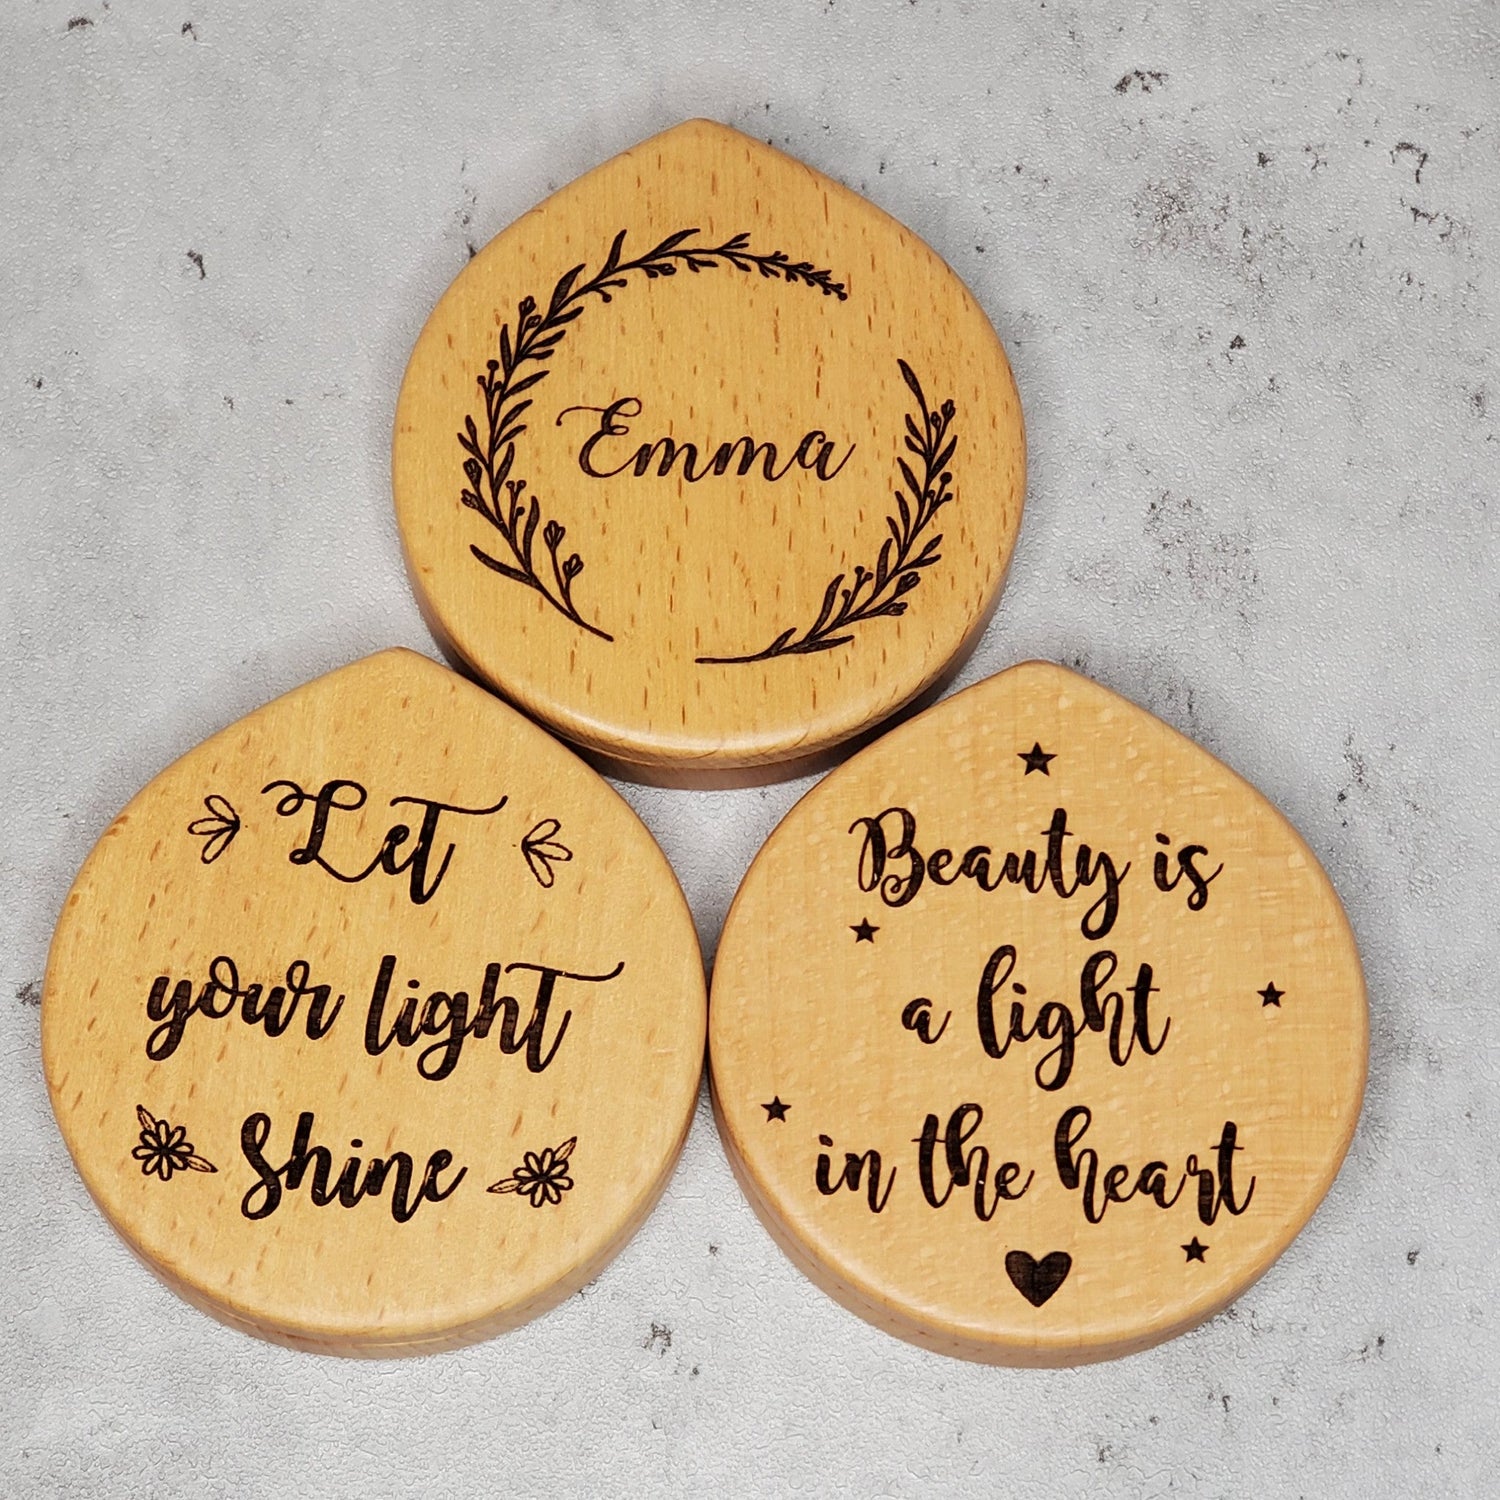 pocket mirror collection with quotes about positivity and name engraved one 